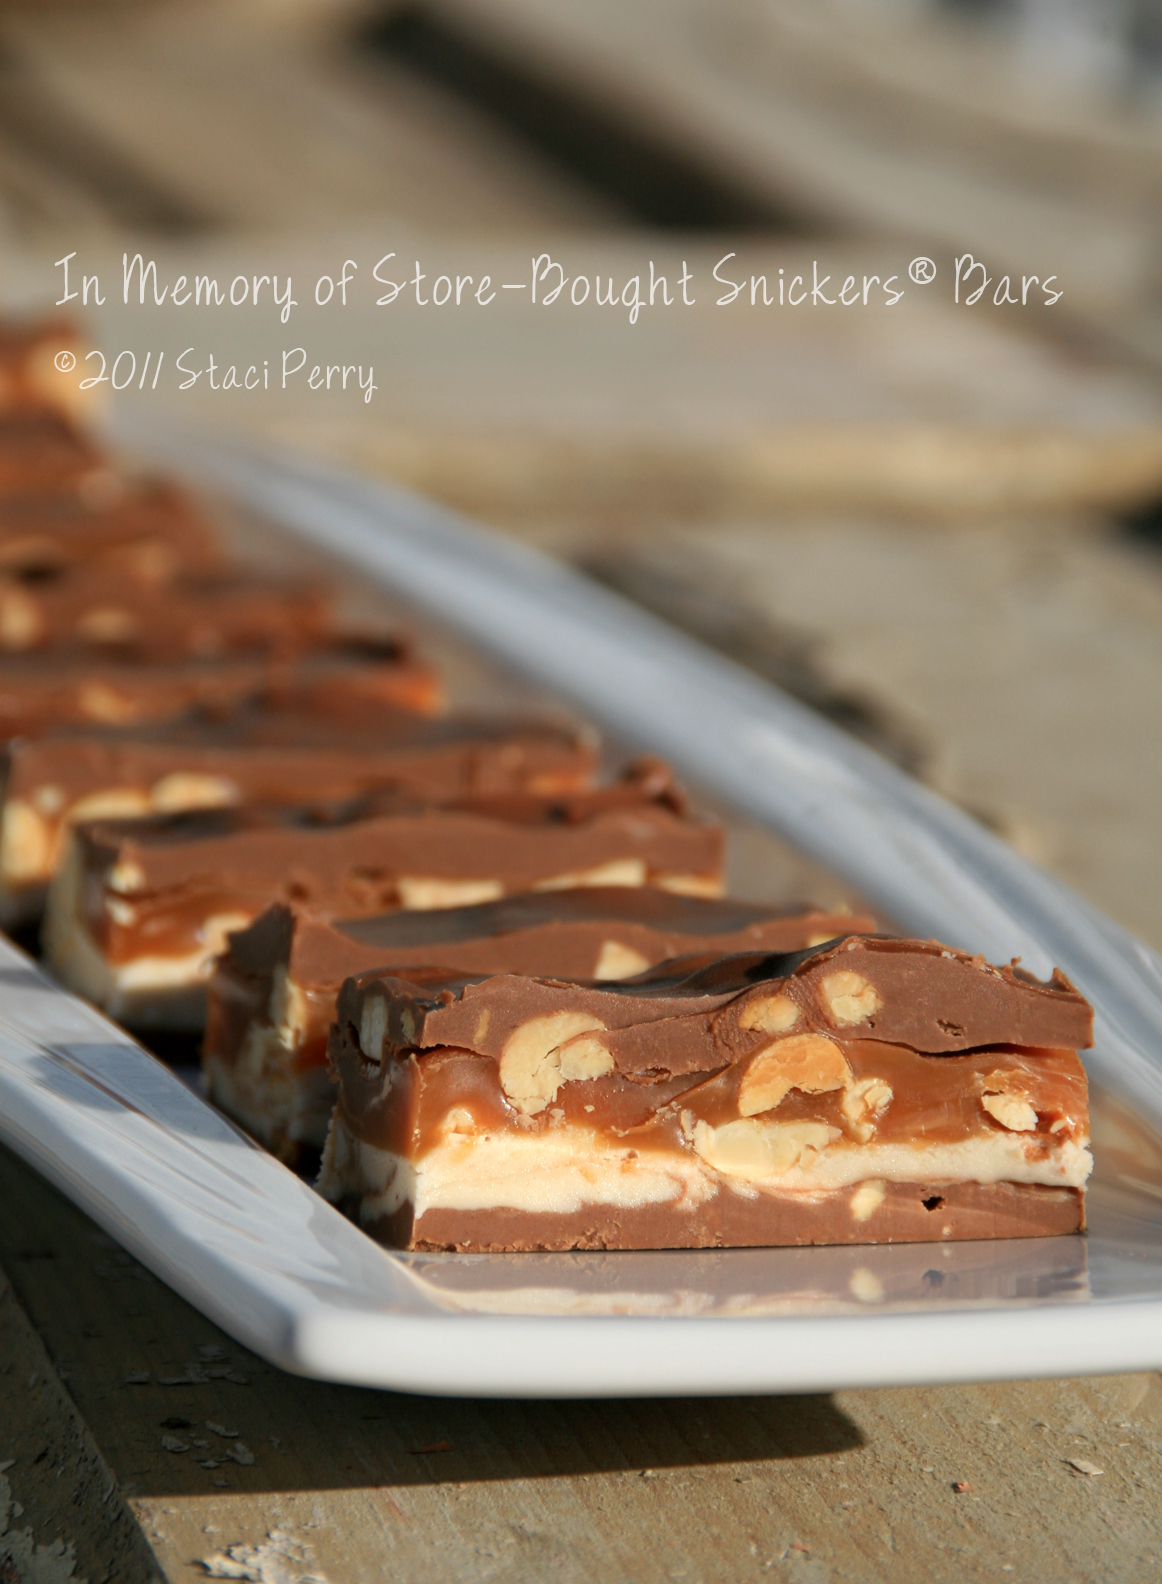 In Memory of Store-Bought Snickers Bars